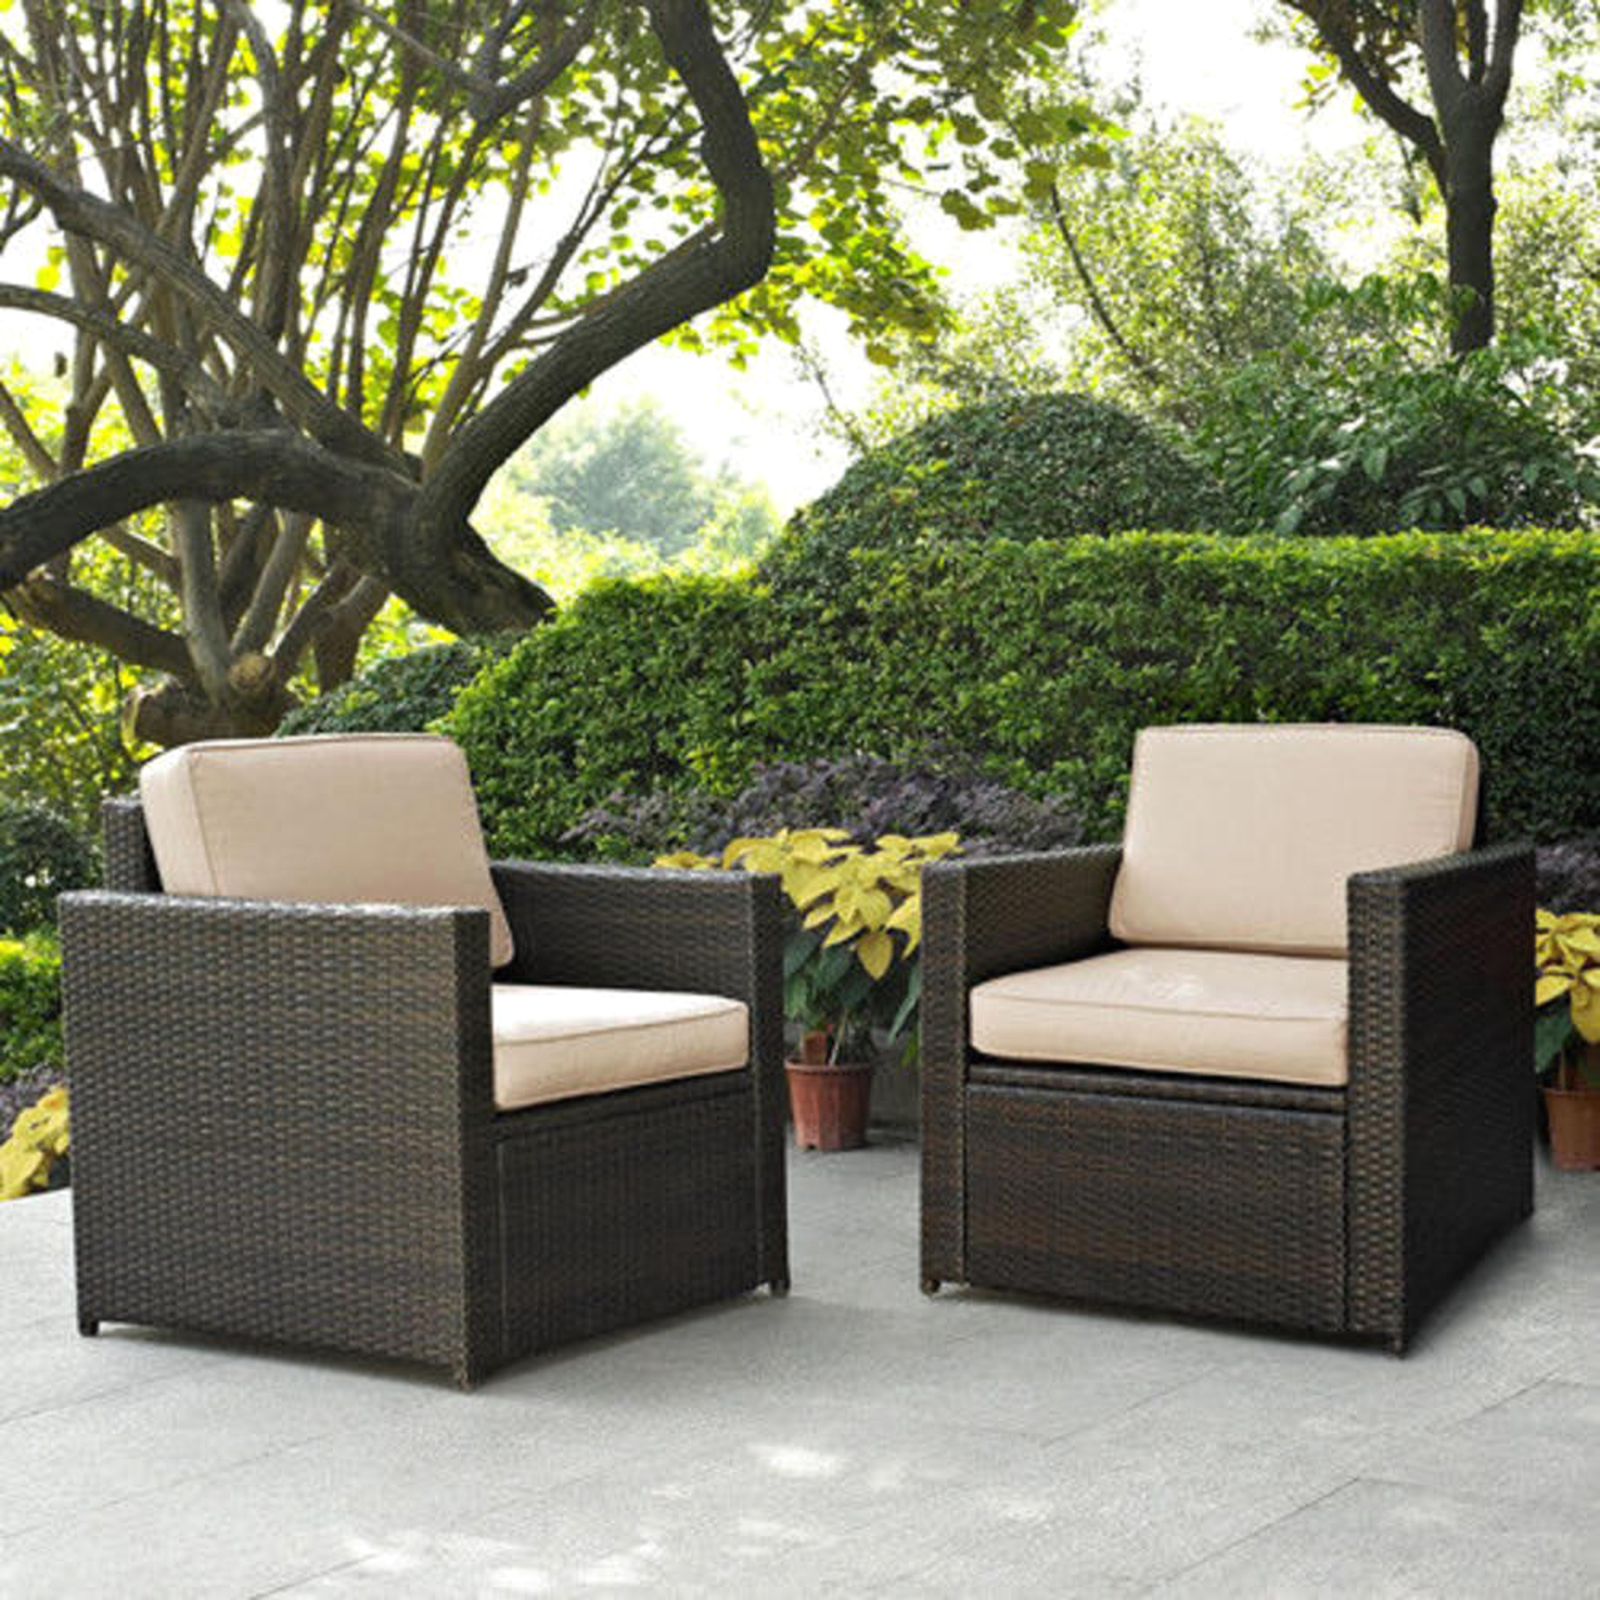 Crosley Furniture Palm Harbor 2pc. Wicker Set with Cushions - Brown and Sand